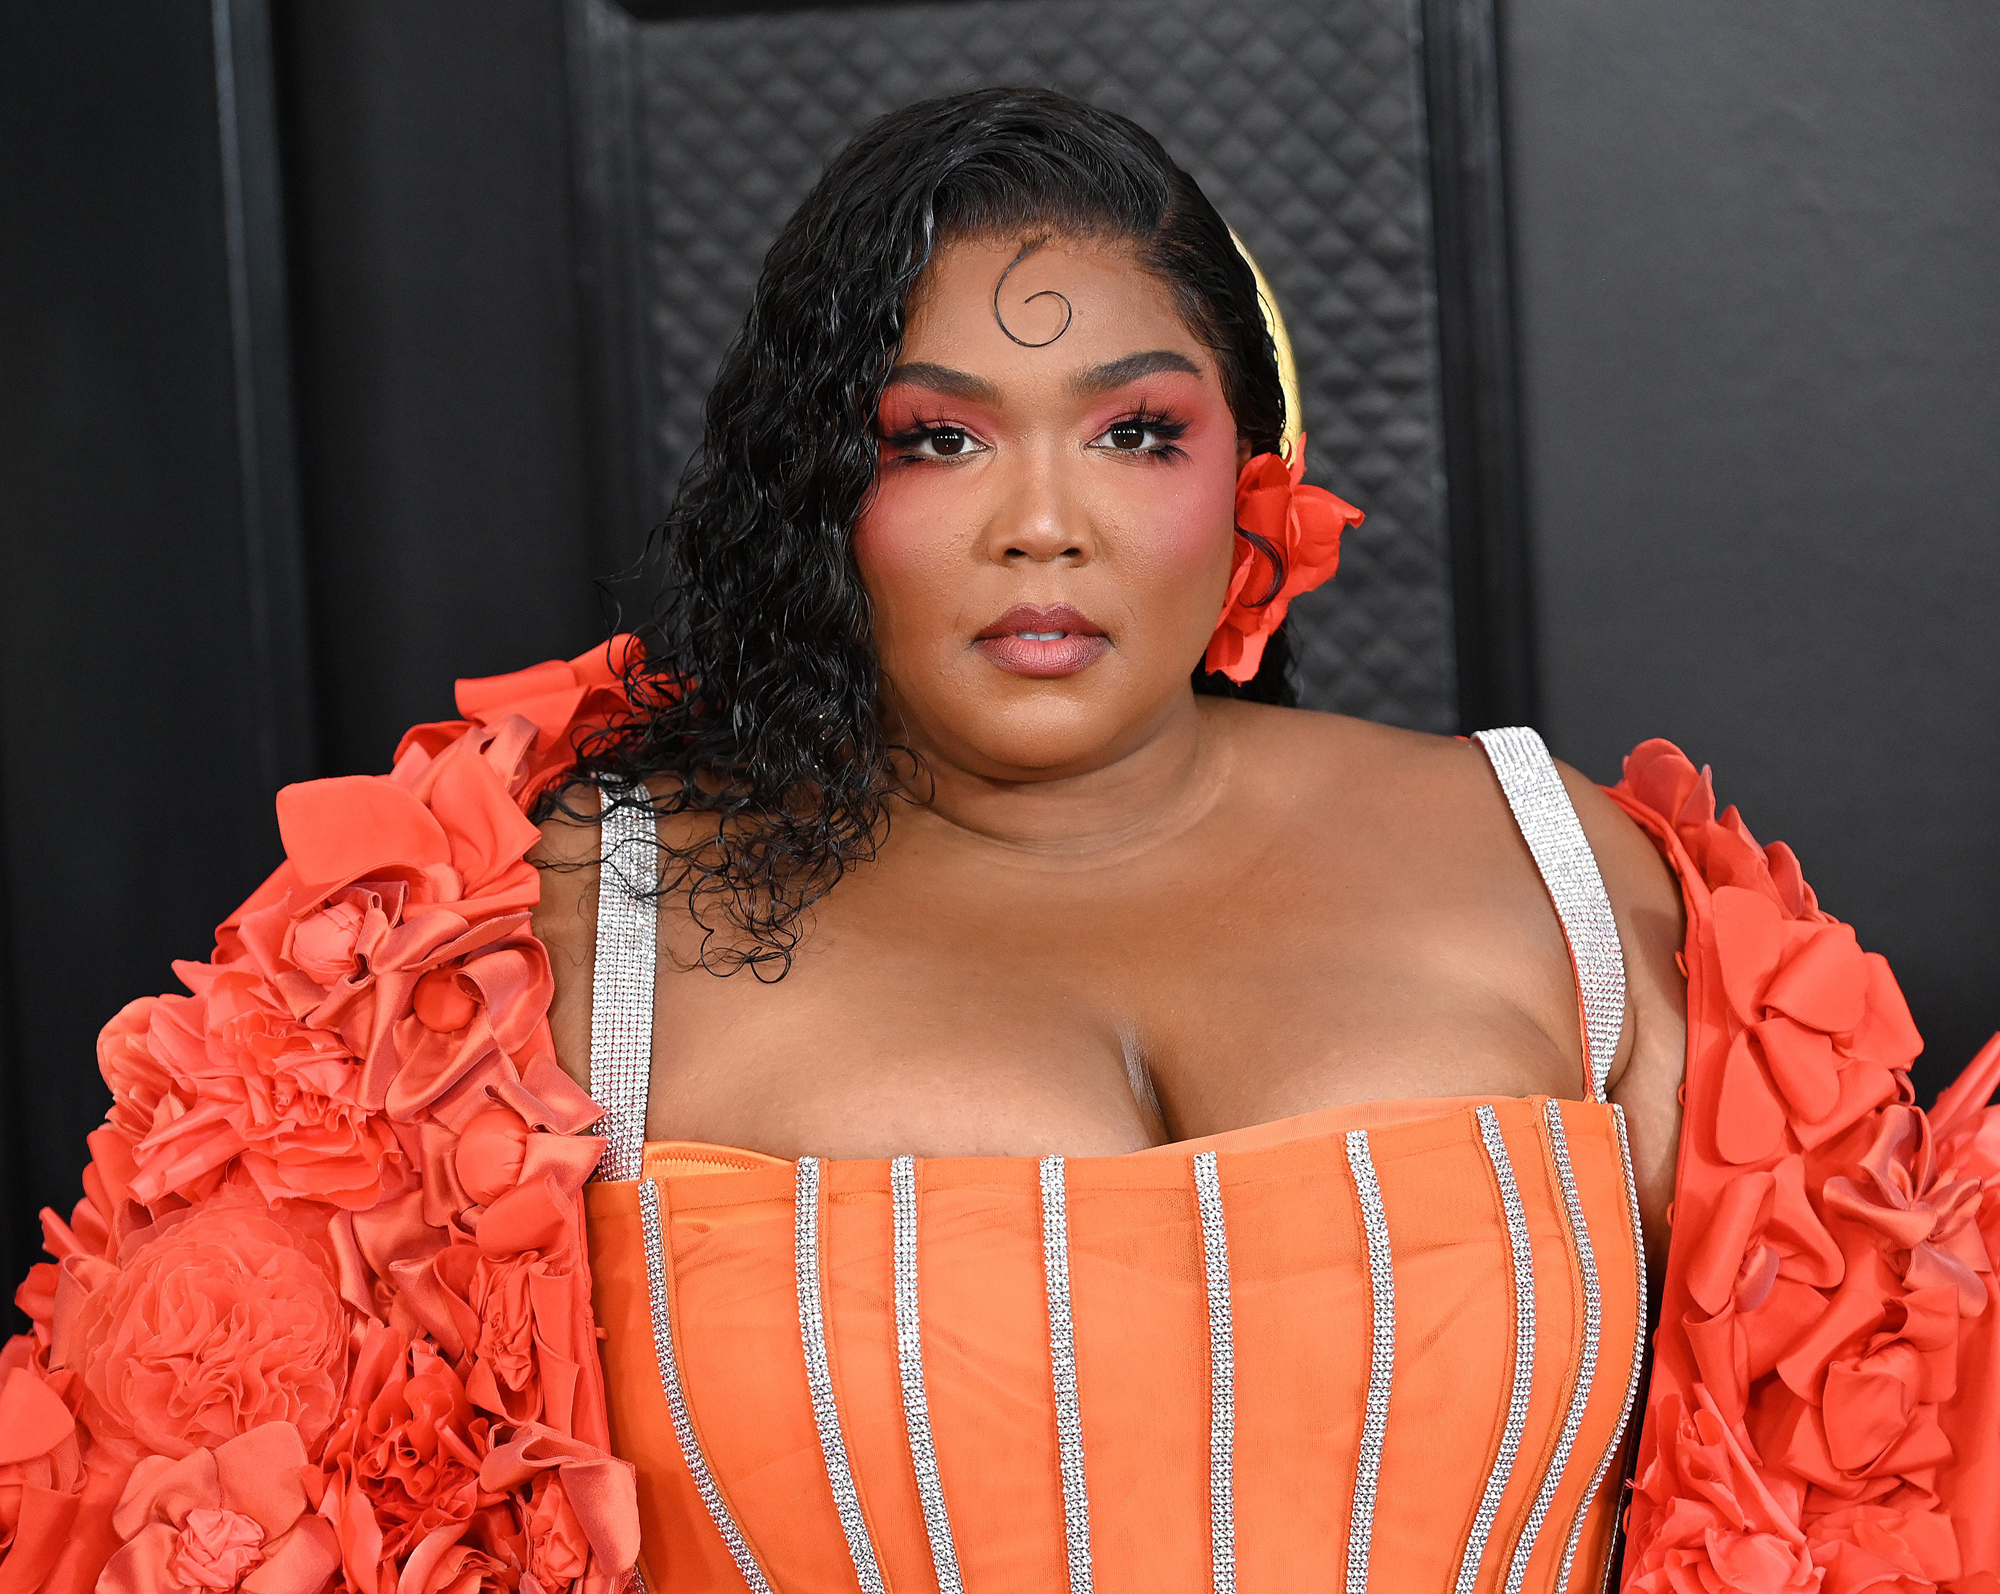 Grammys 2023: Lizzo's Curly Hairstyle How-To: Tips